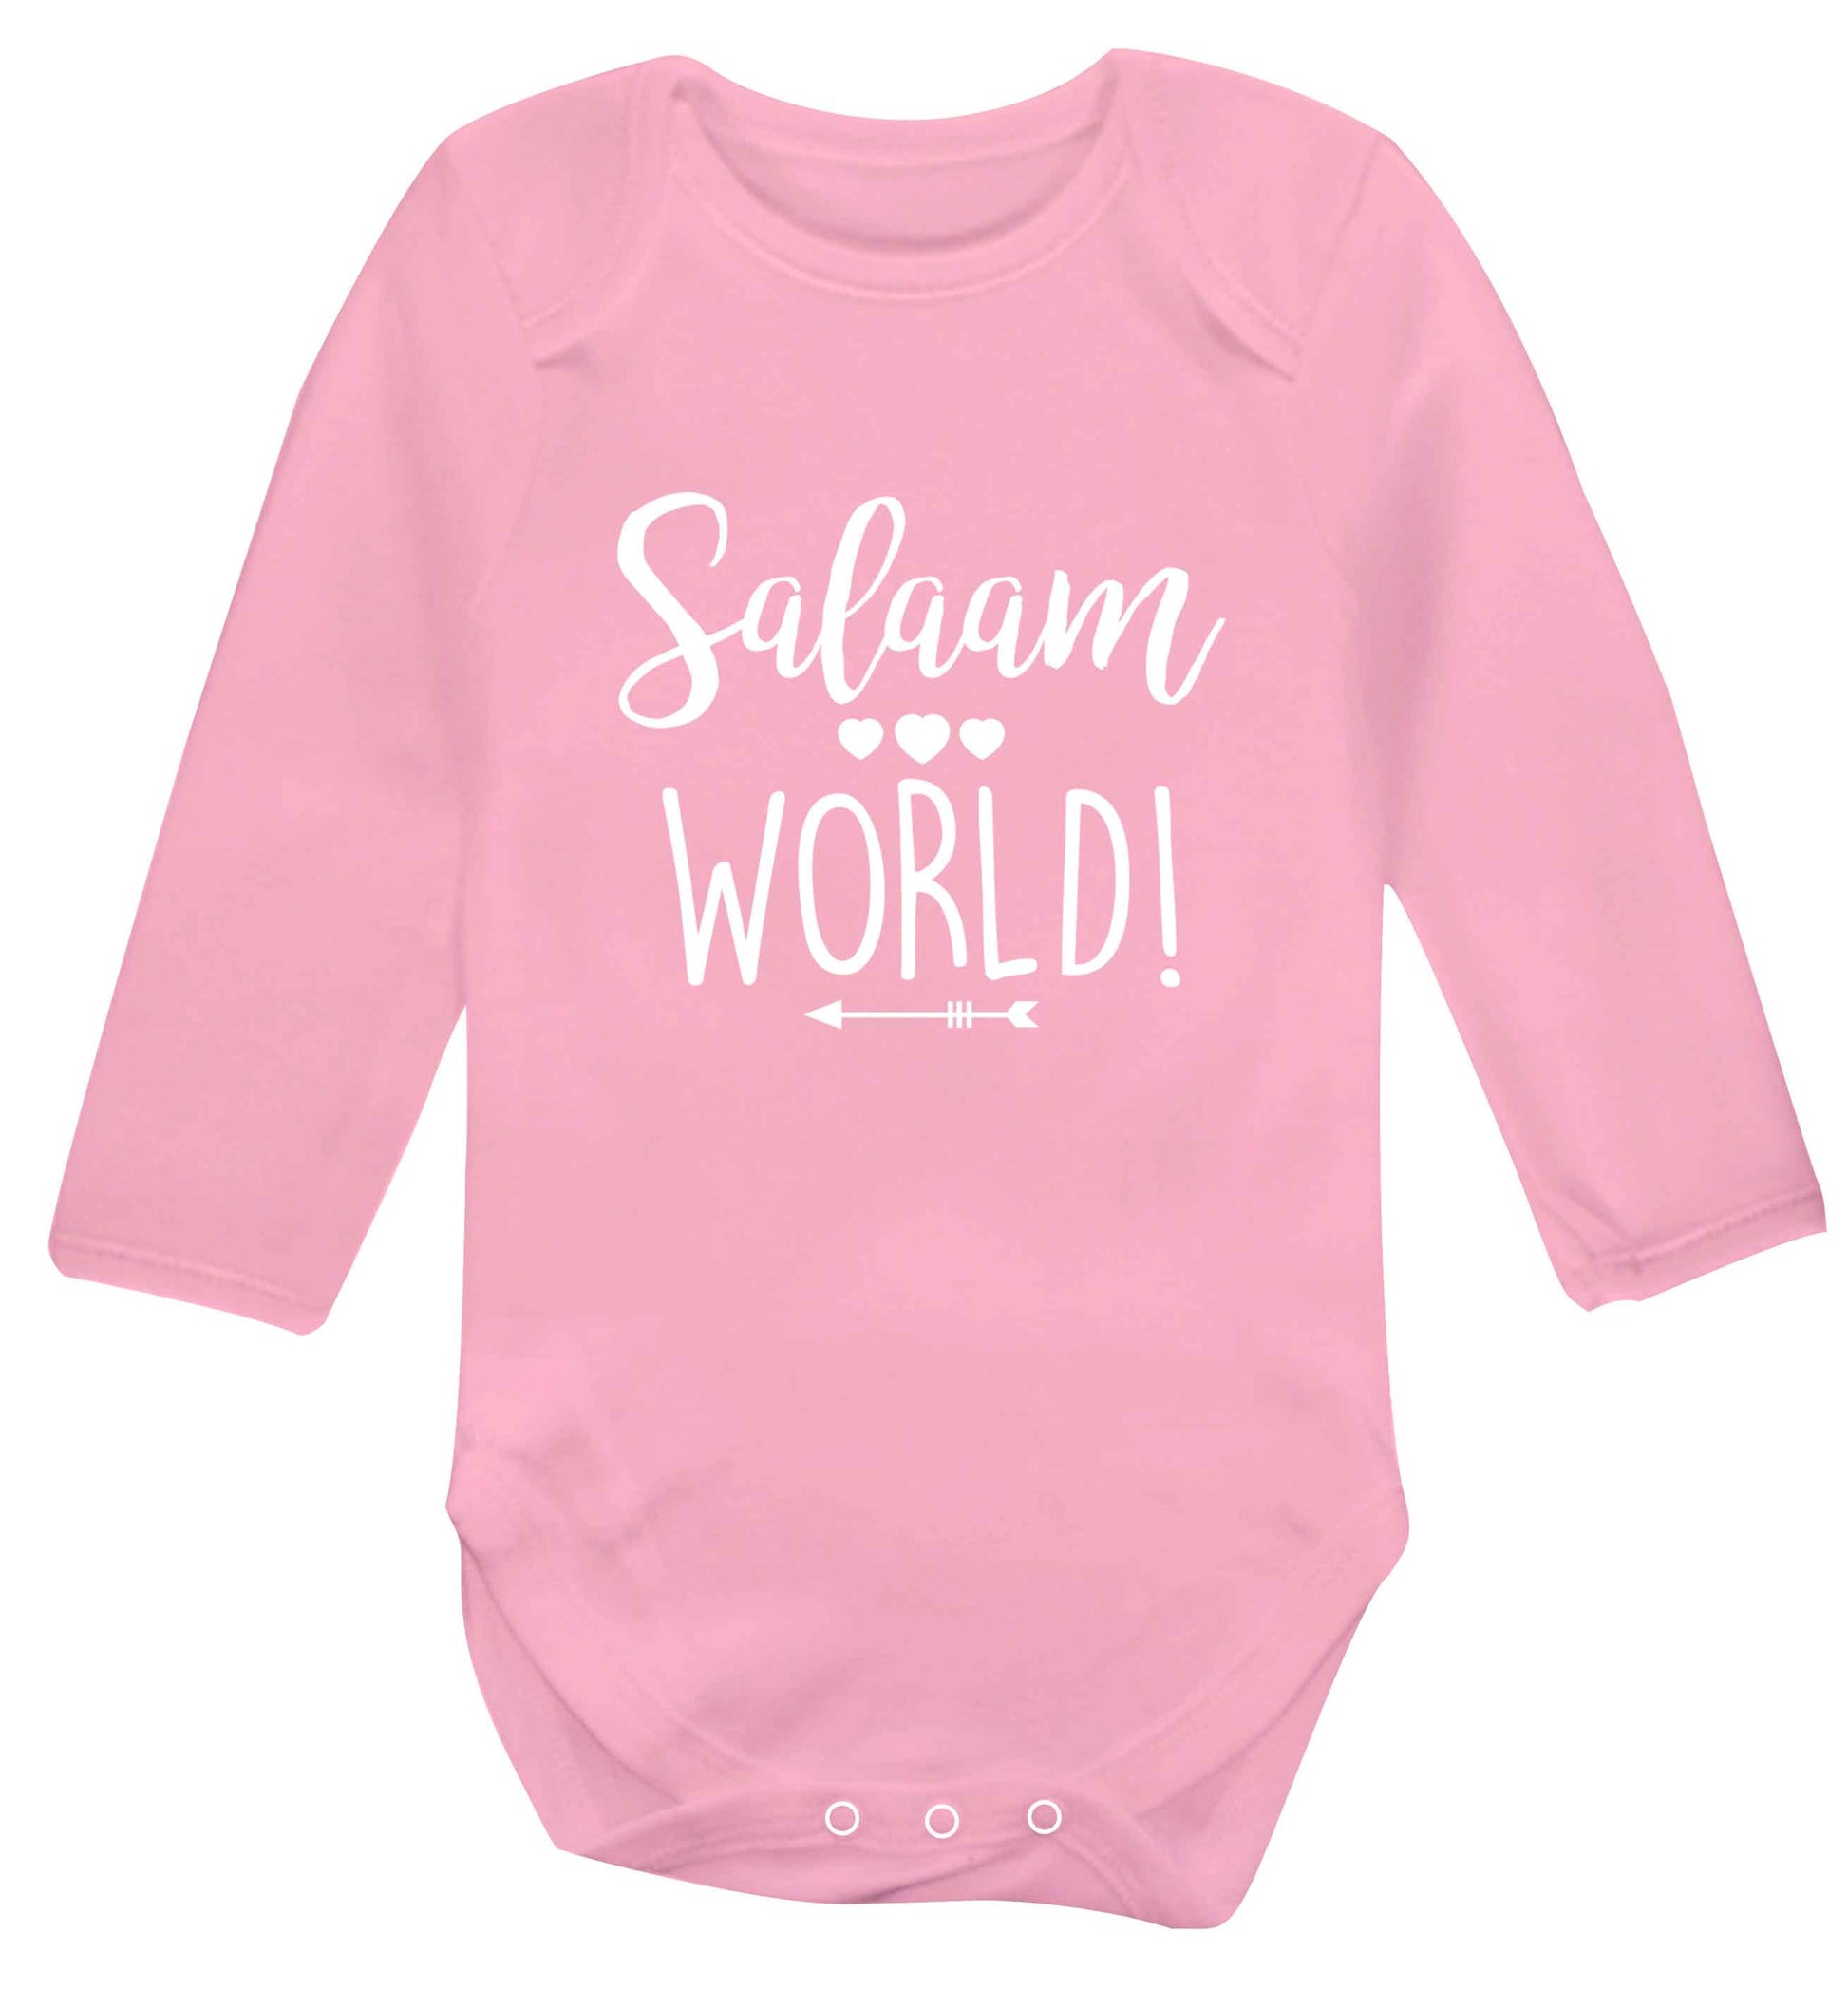 Salaam world baby vest long sleeved pale pink 6-12 months